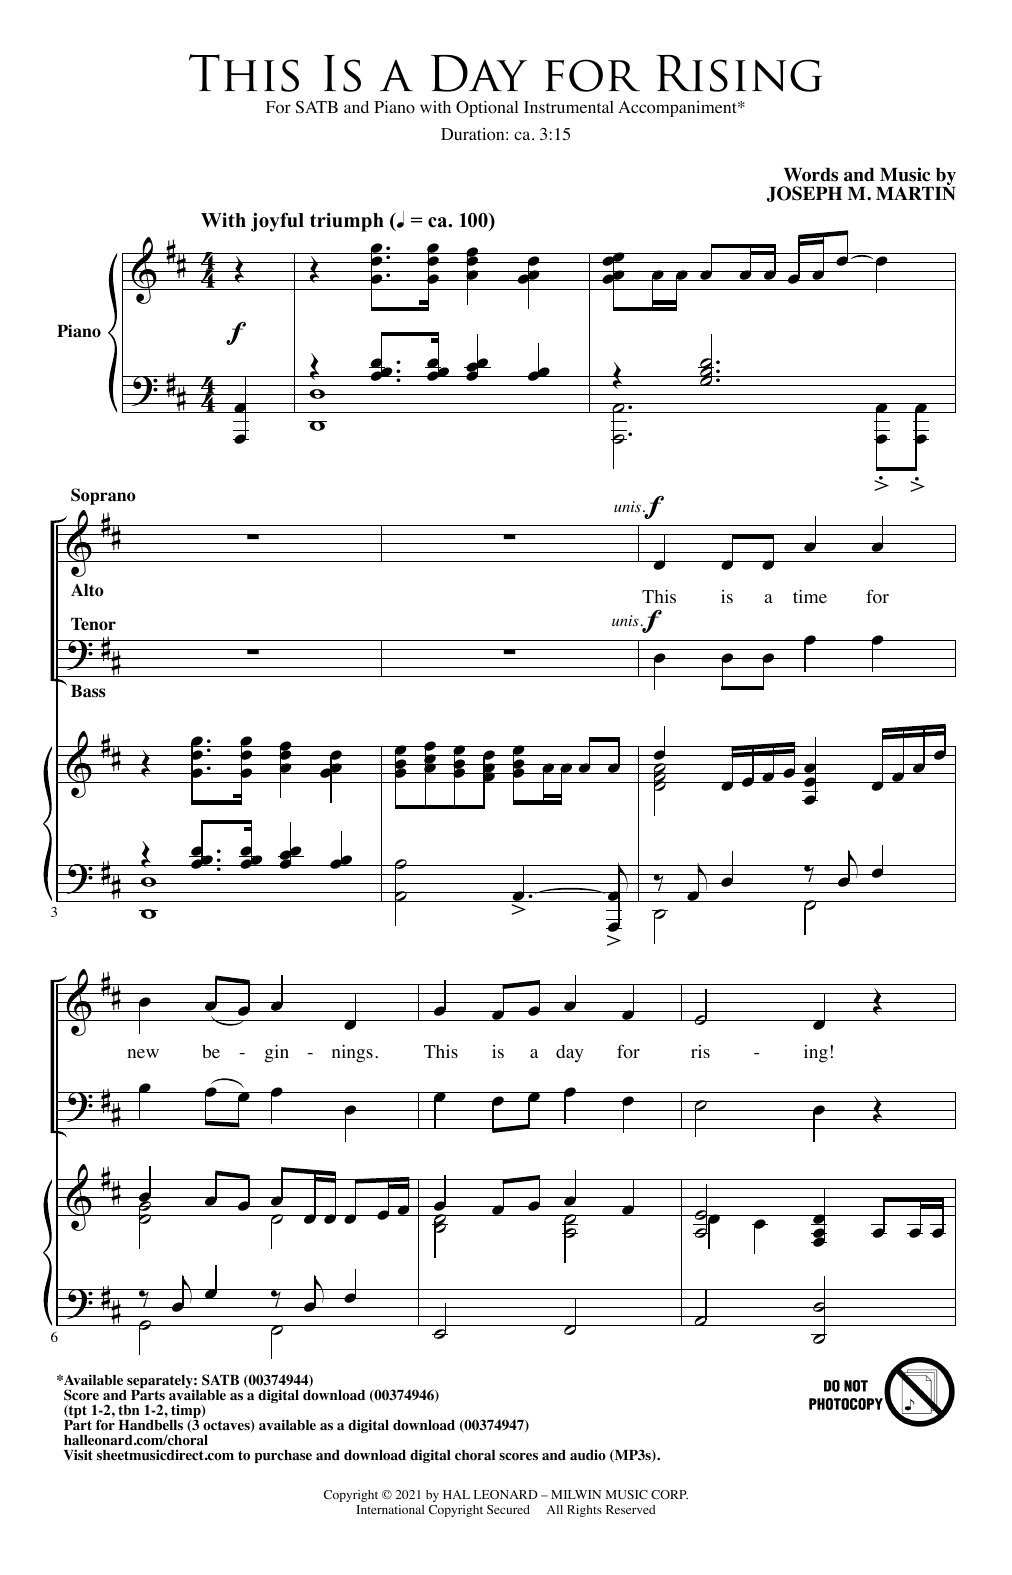 Download Joseph M. Martin This Is A Day For Rising Sheet Music